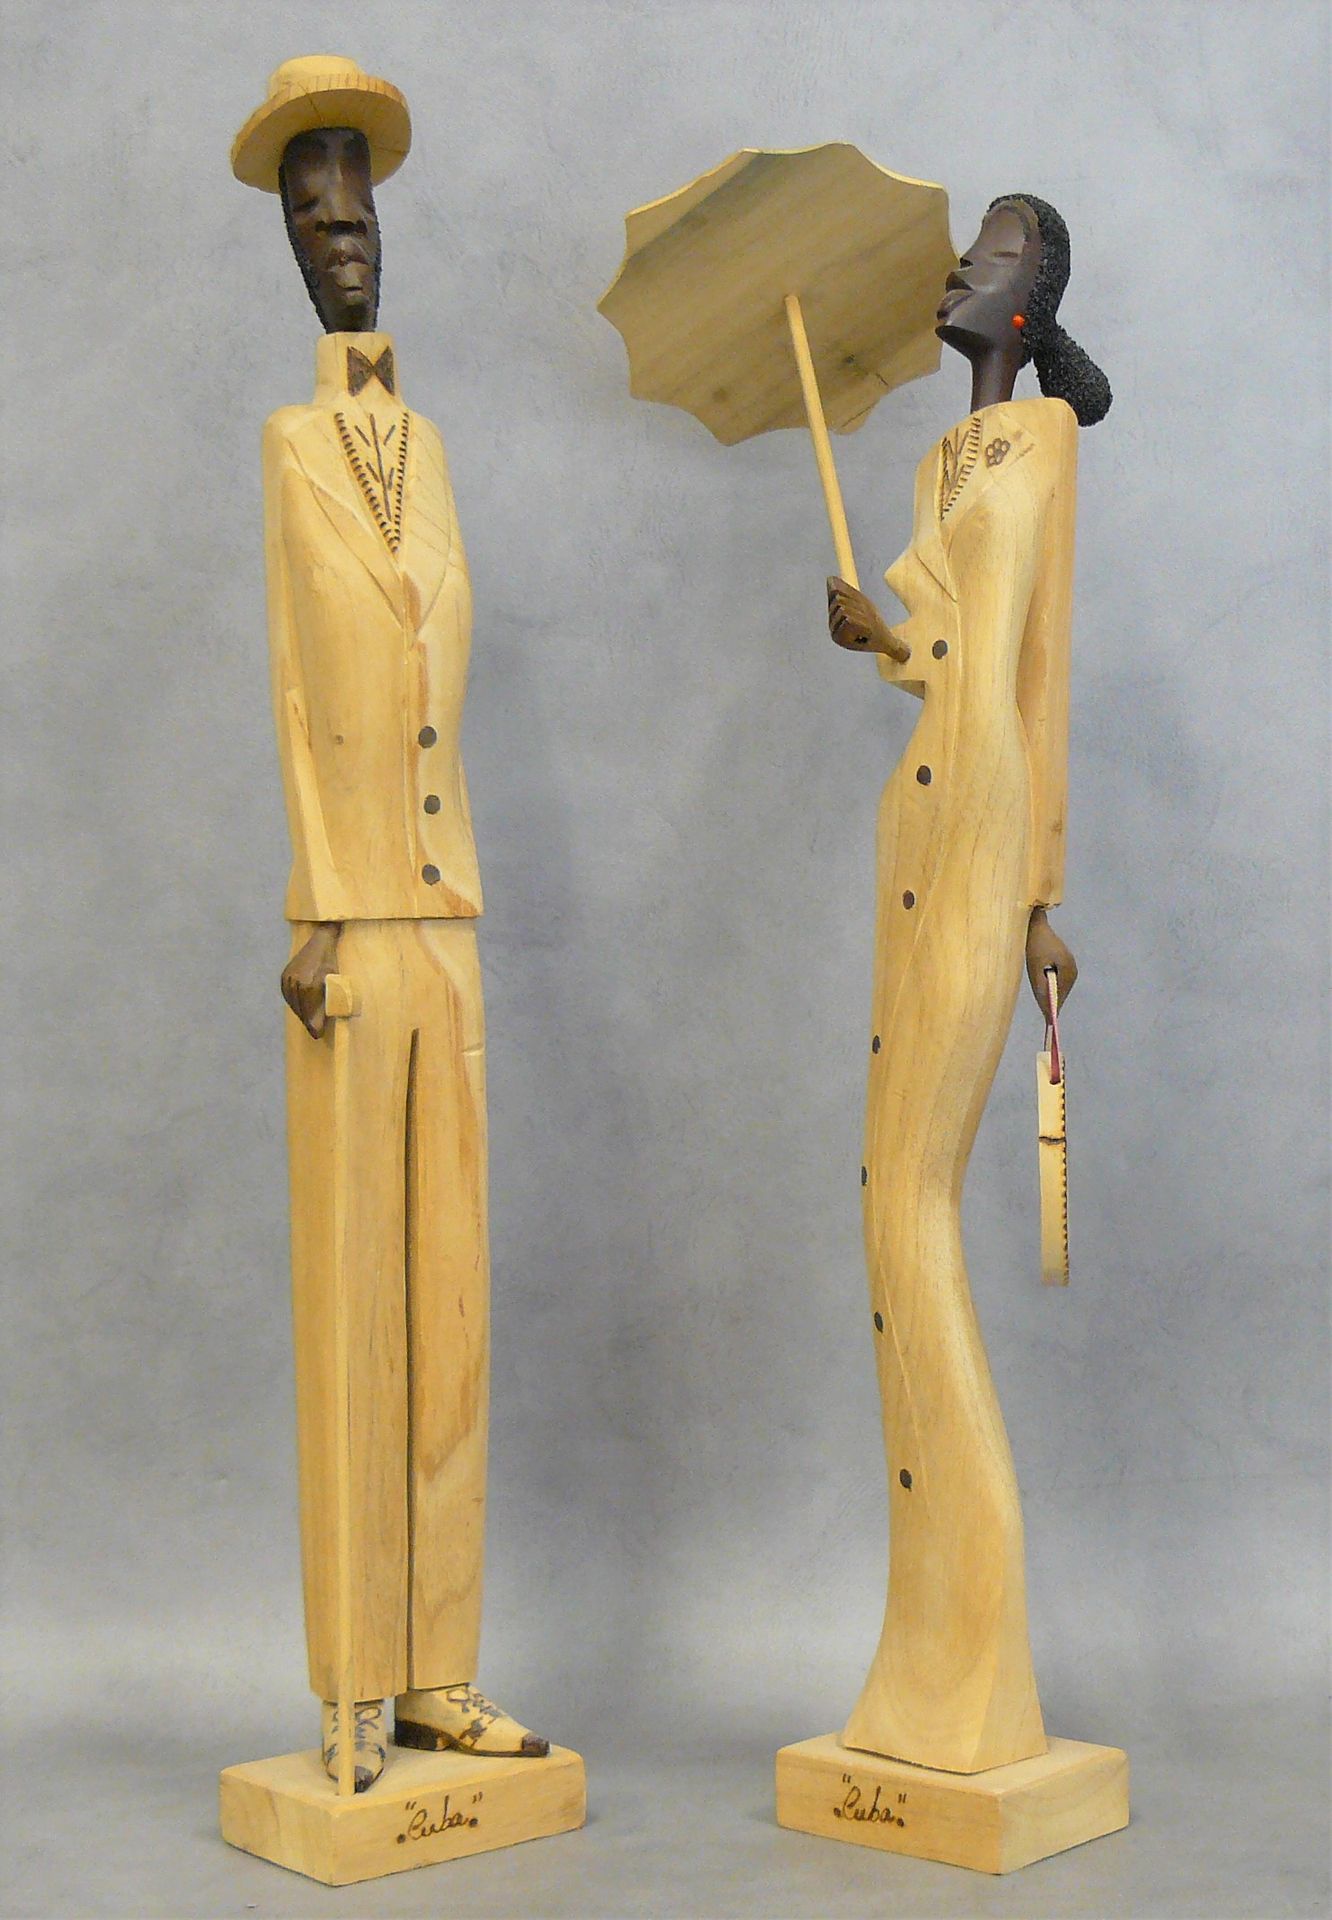 Null two figures in carved wood: souvenir of Cuba - H 55 cm